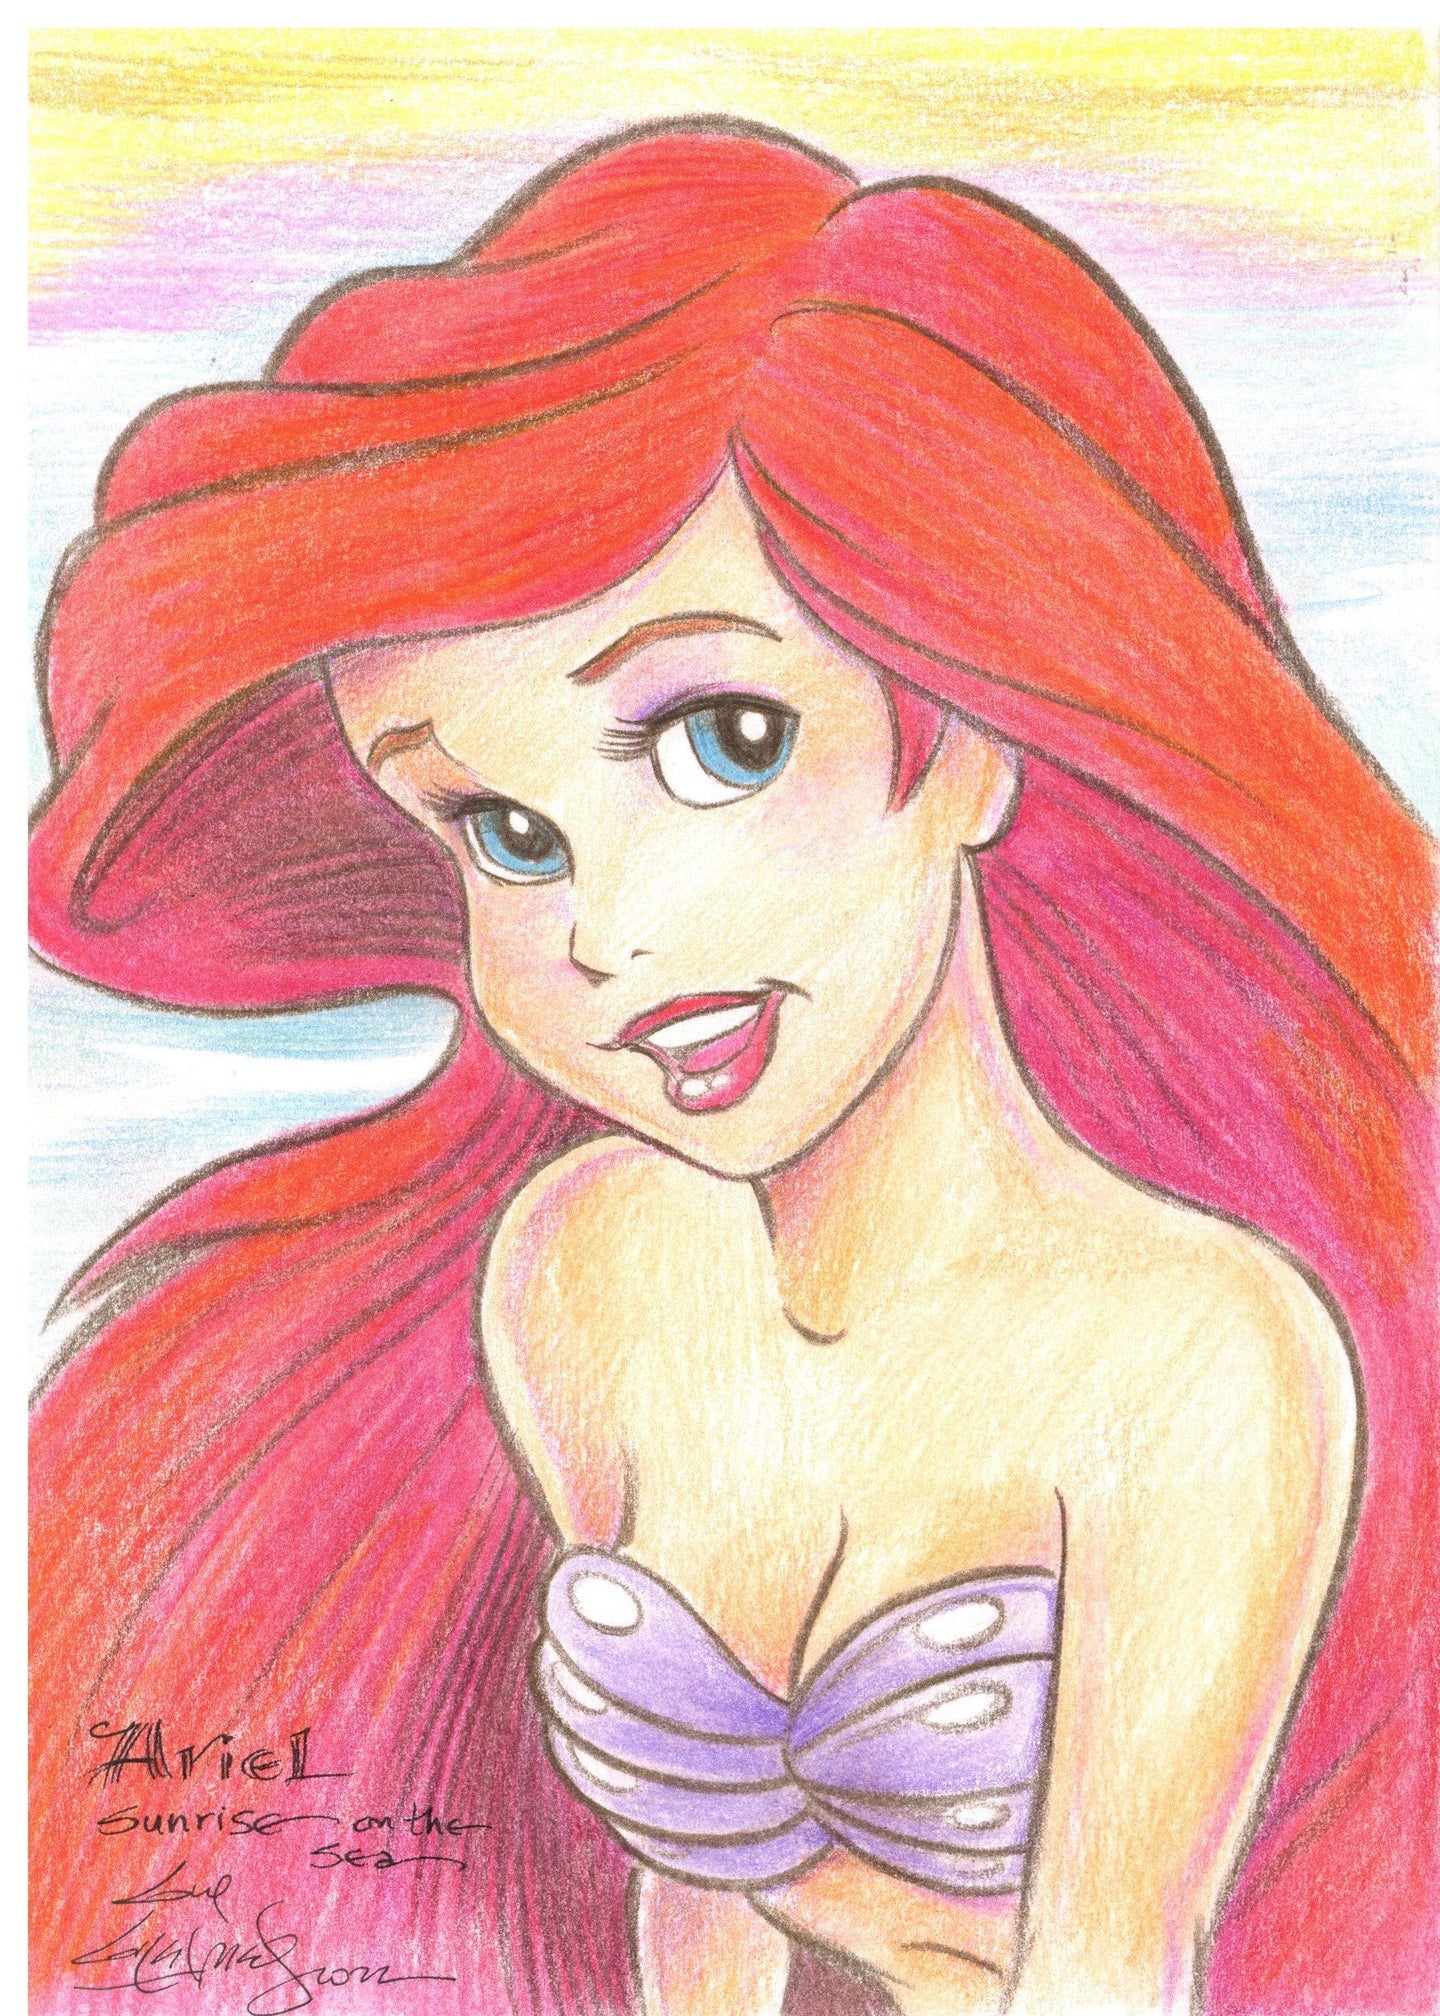 The Little Mermaid Ariel (Color) Original Art 6x8 Sketch - Created by Guy Gilchrist